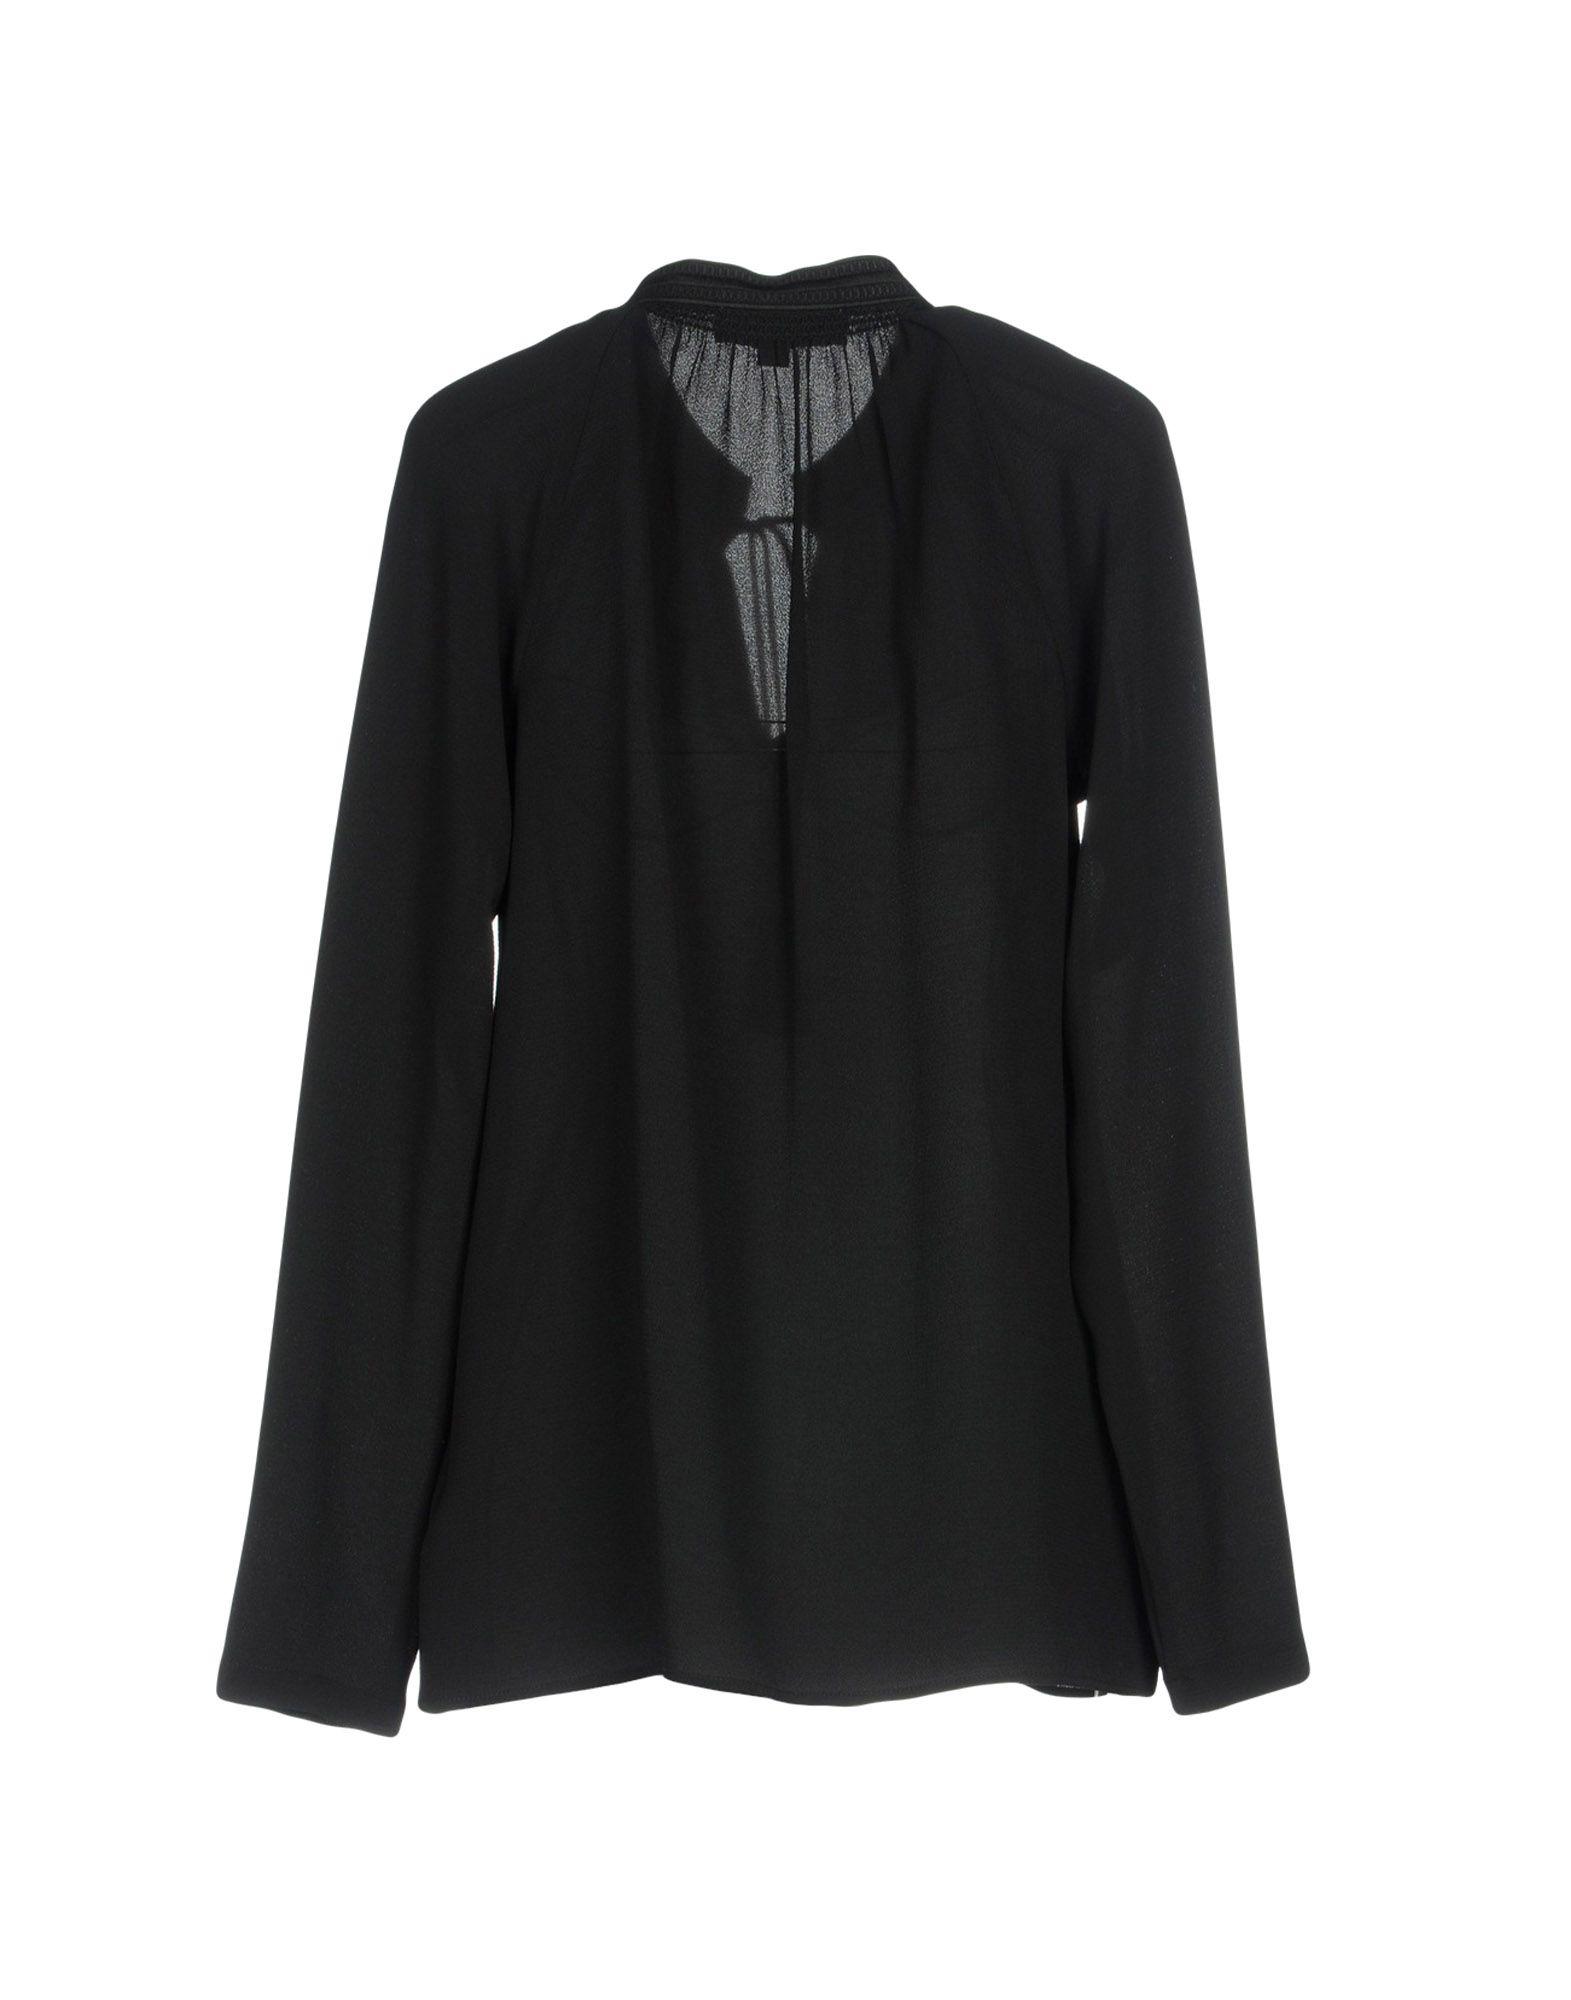 MICHAEL Michael Kors Synthetic Blouse in Black - Lyst